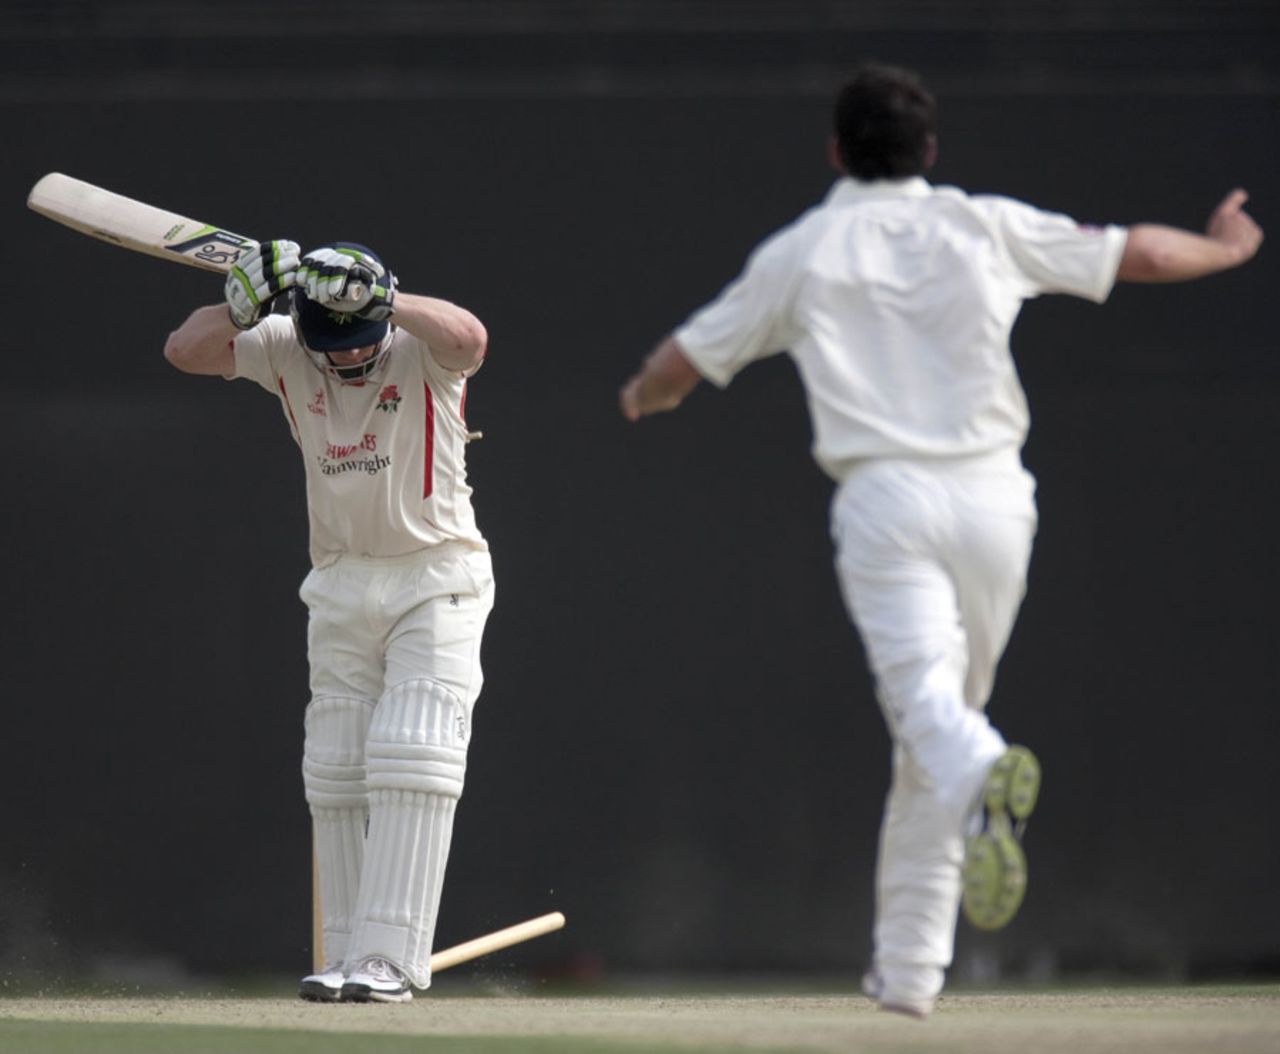 Steven Croft is bowled by Lewis Gregory for 4, MCC v Lancashire, Abu Dhabi, Day 2, March 28, 2012